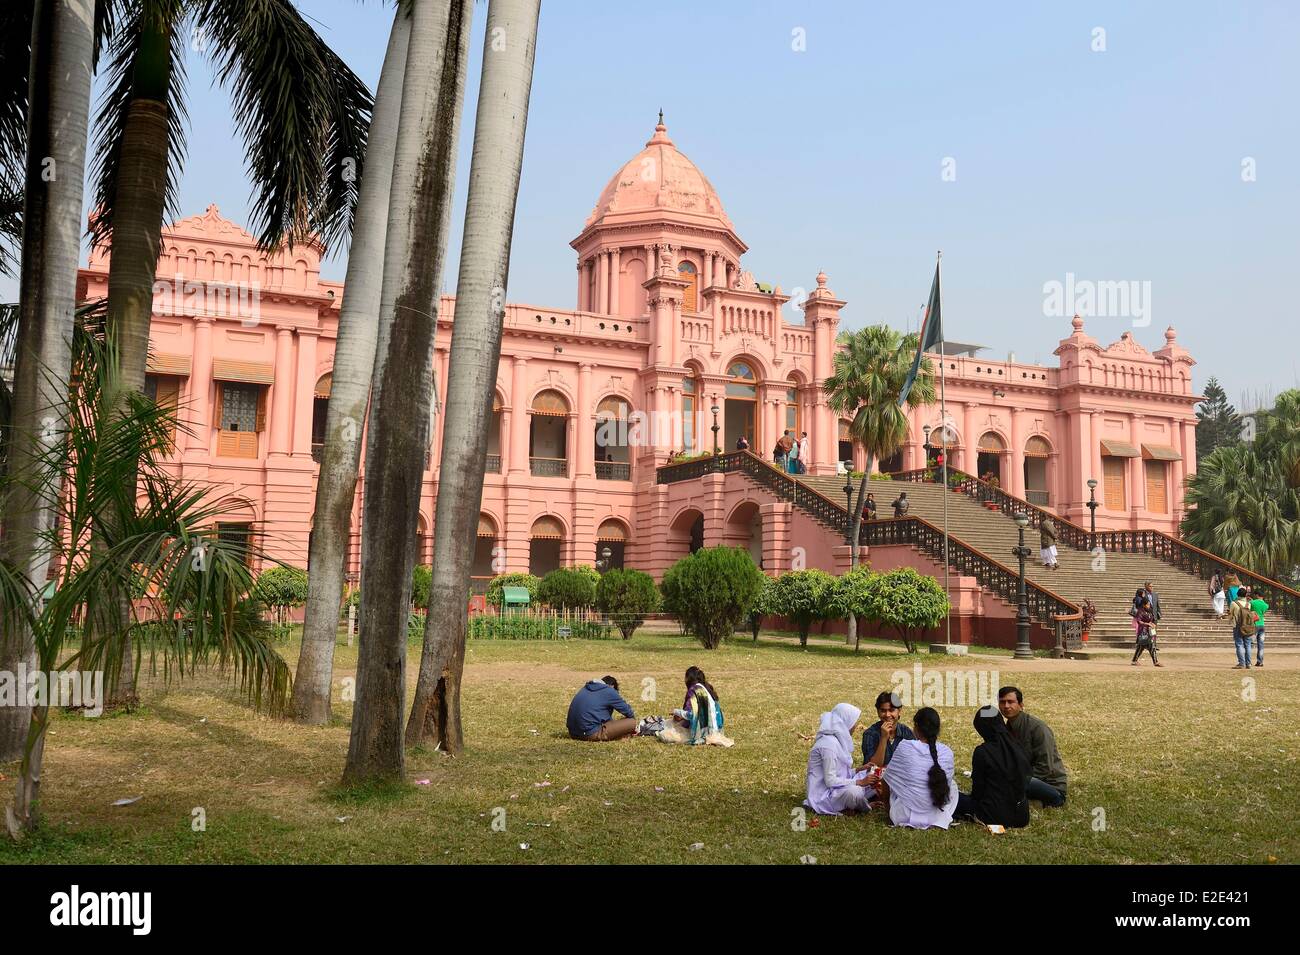 Bangladesh Dhaka (Dacca) Old Dhaka the Ahsan Manzil (or Pink Palace) built between 1859 and 1869 in an indo-saracenic style was Stock Photo